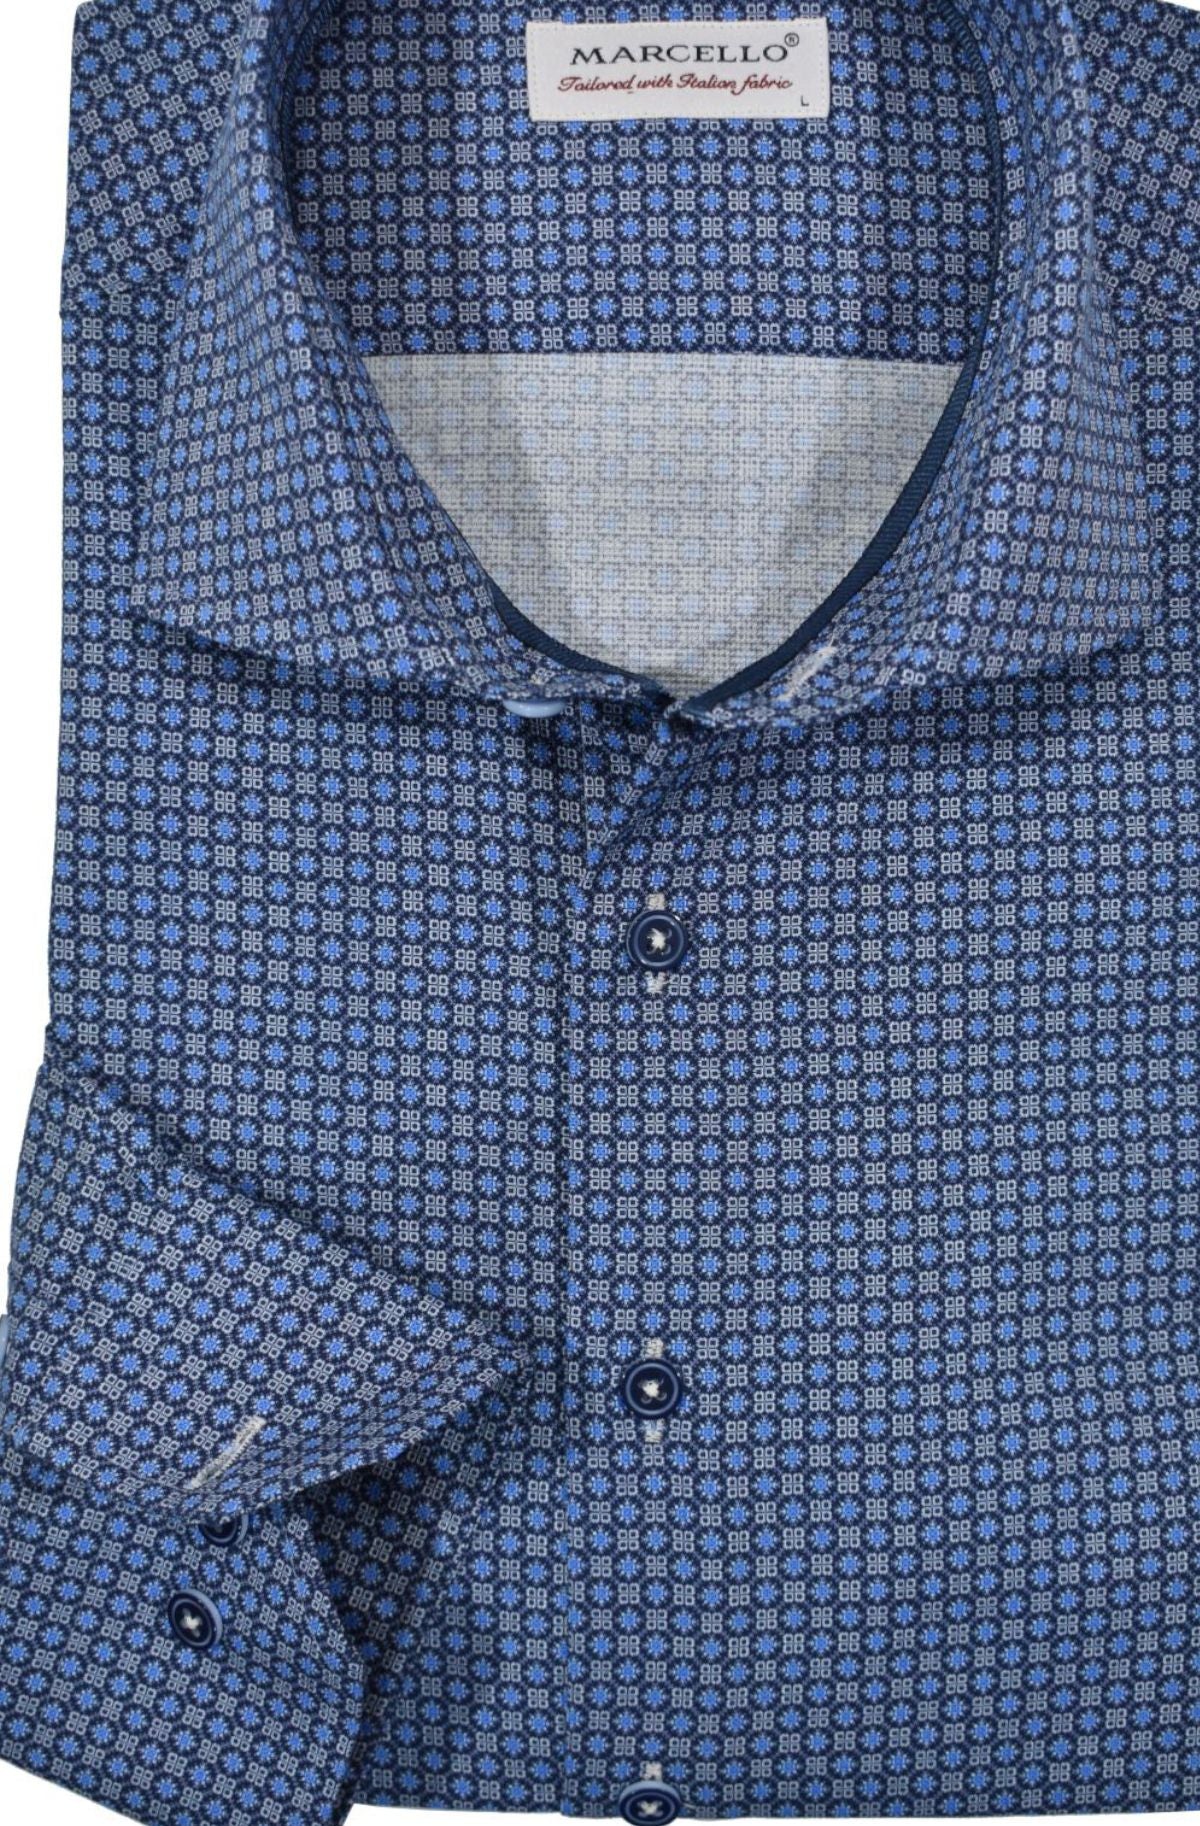 Mixed shades of blue and gray make this medallion an ideal pick for any look—dressy or casual. Its classic, neat pattern exudes classic style, while luxe cotton and a hint of lycra make it soft and stretchy for comfort. Navy taping adorns the neck and button placket, with custom matched buttons completing the look.